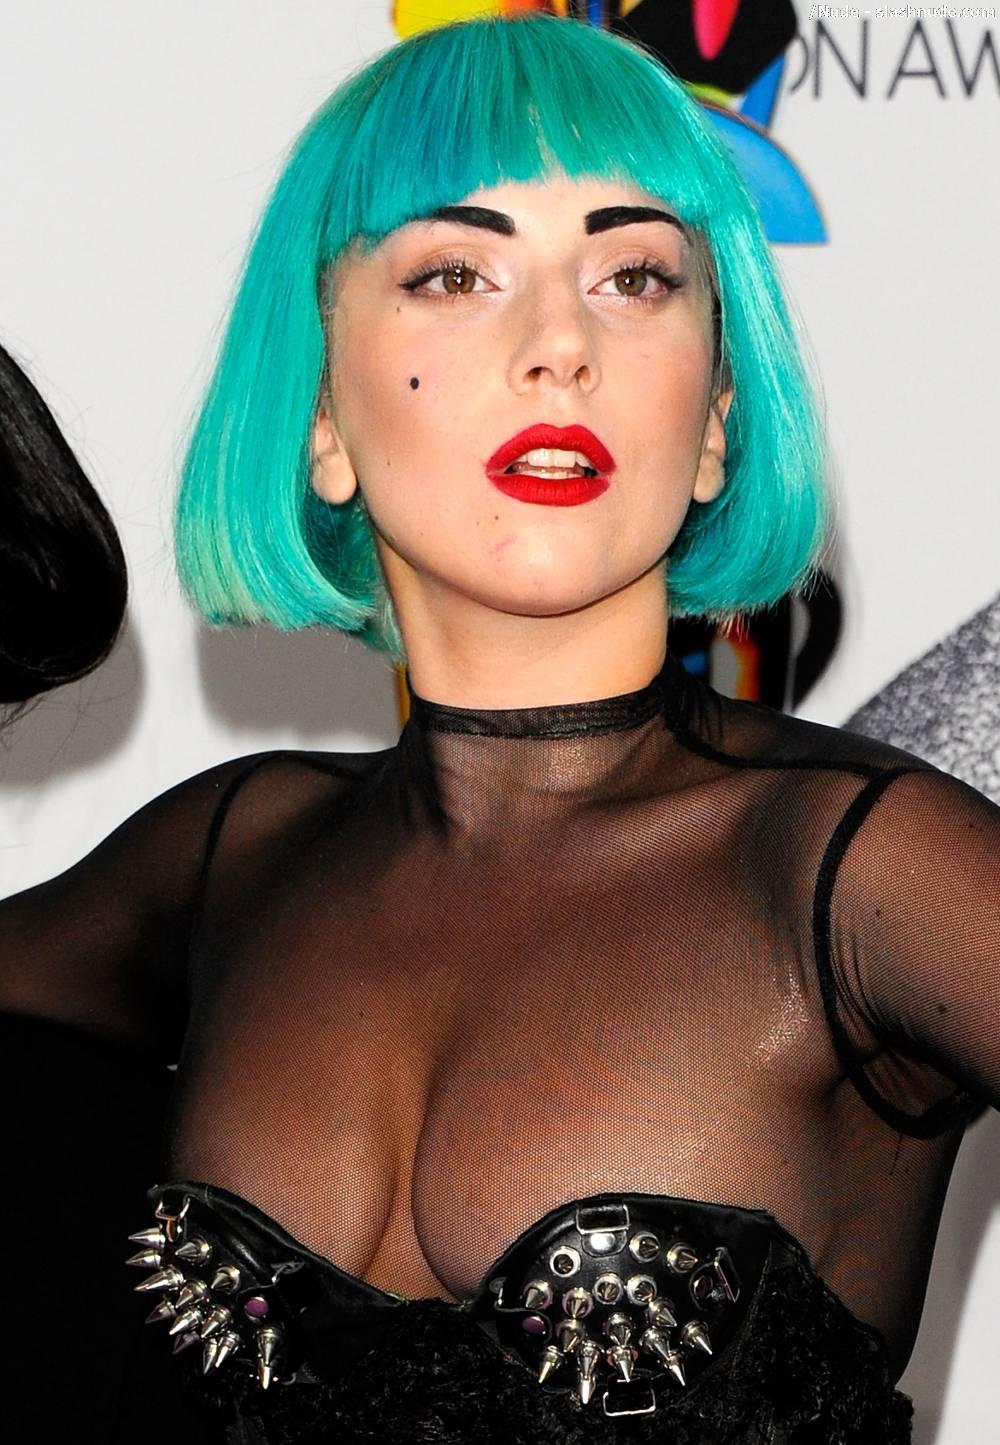 Lady Gaga Nipples Make Special Appearance At Fashion Event 7